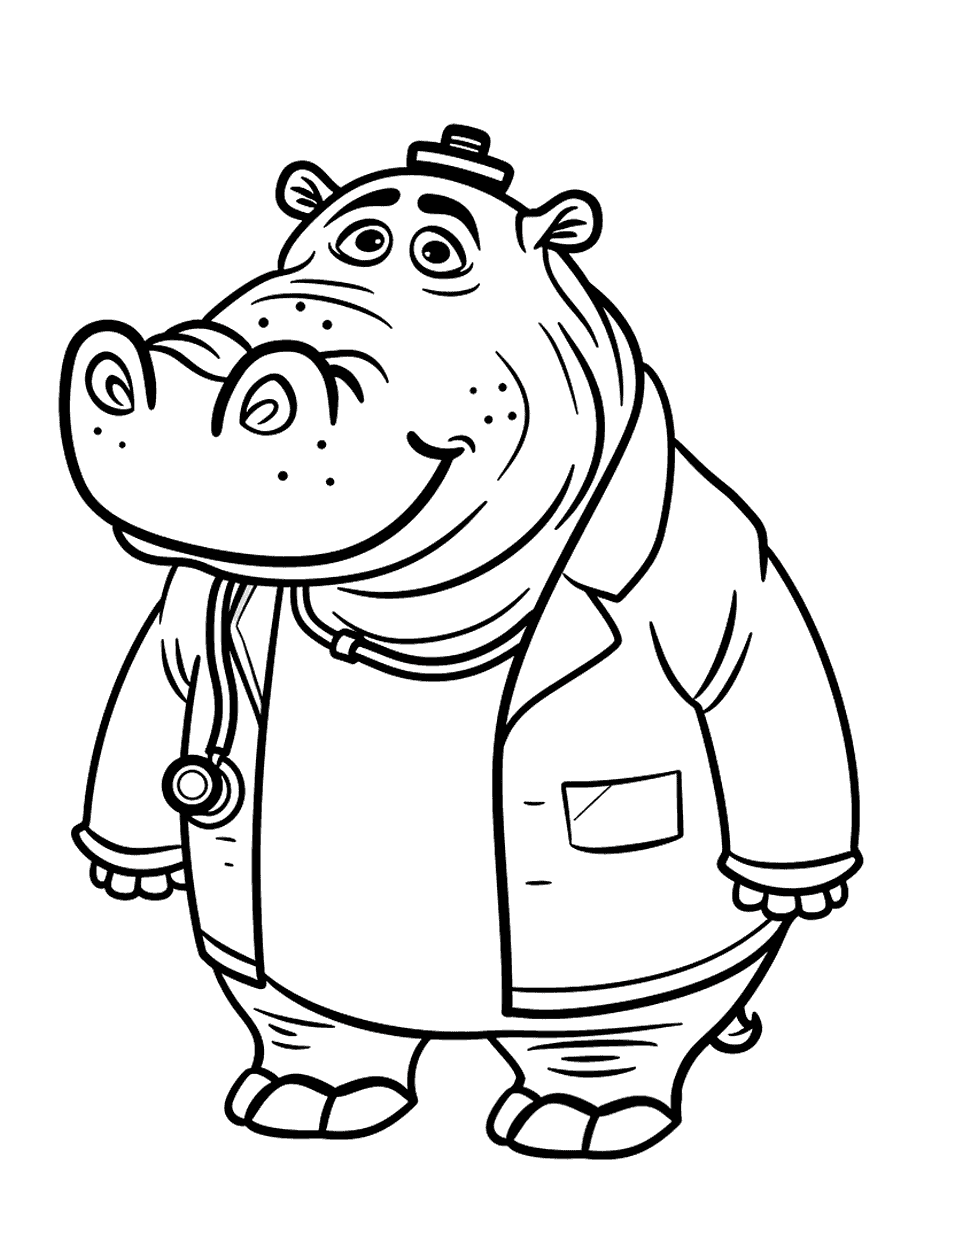 Hippo Doctor Coloring Page - A hippo wearing a stethoscope and doctor’s coat, ready to treat patients.